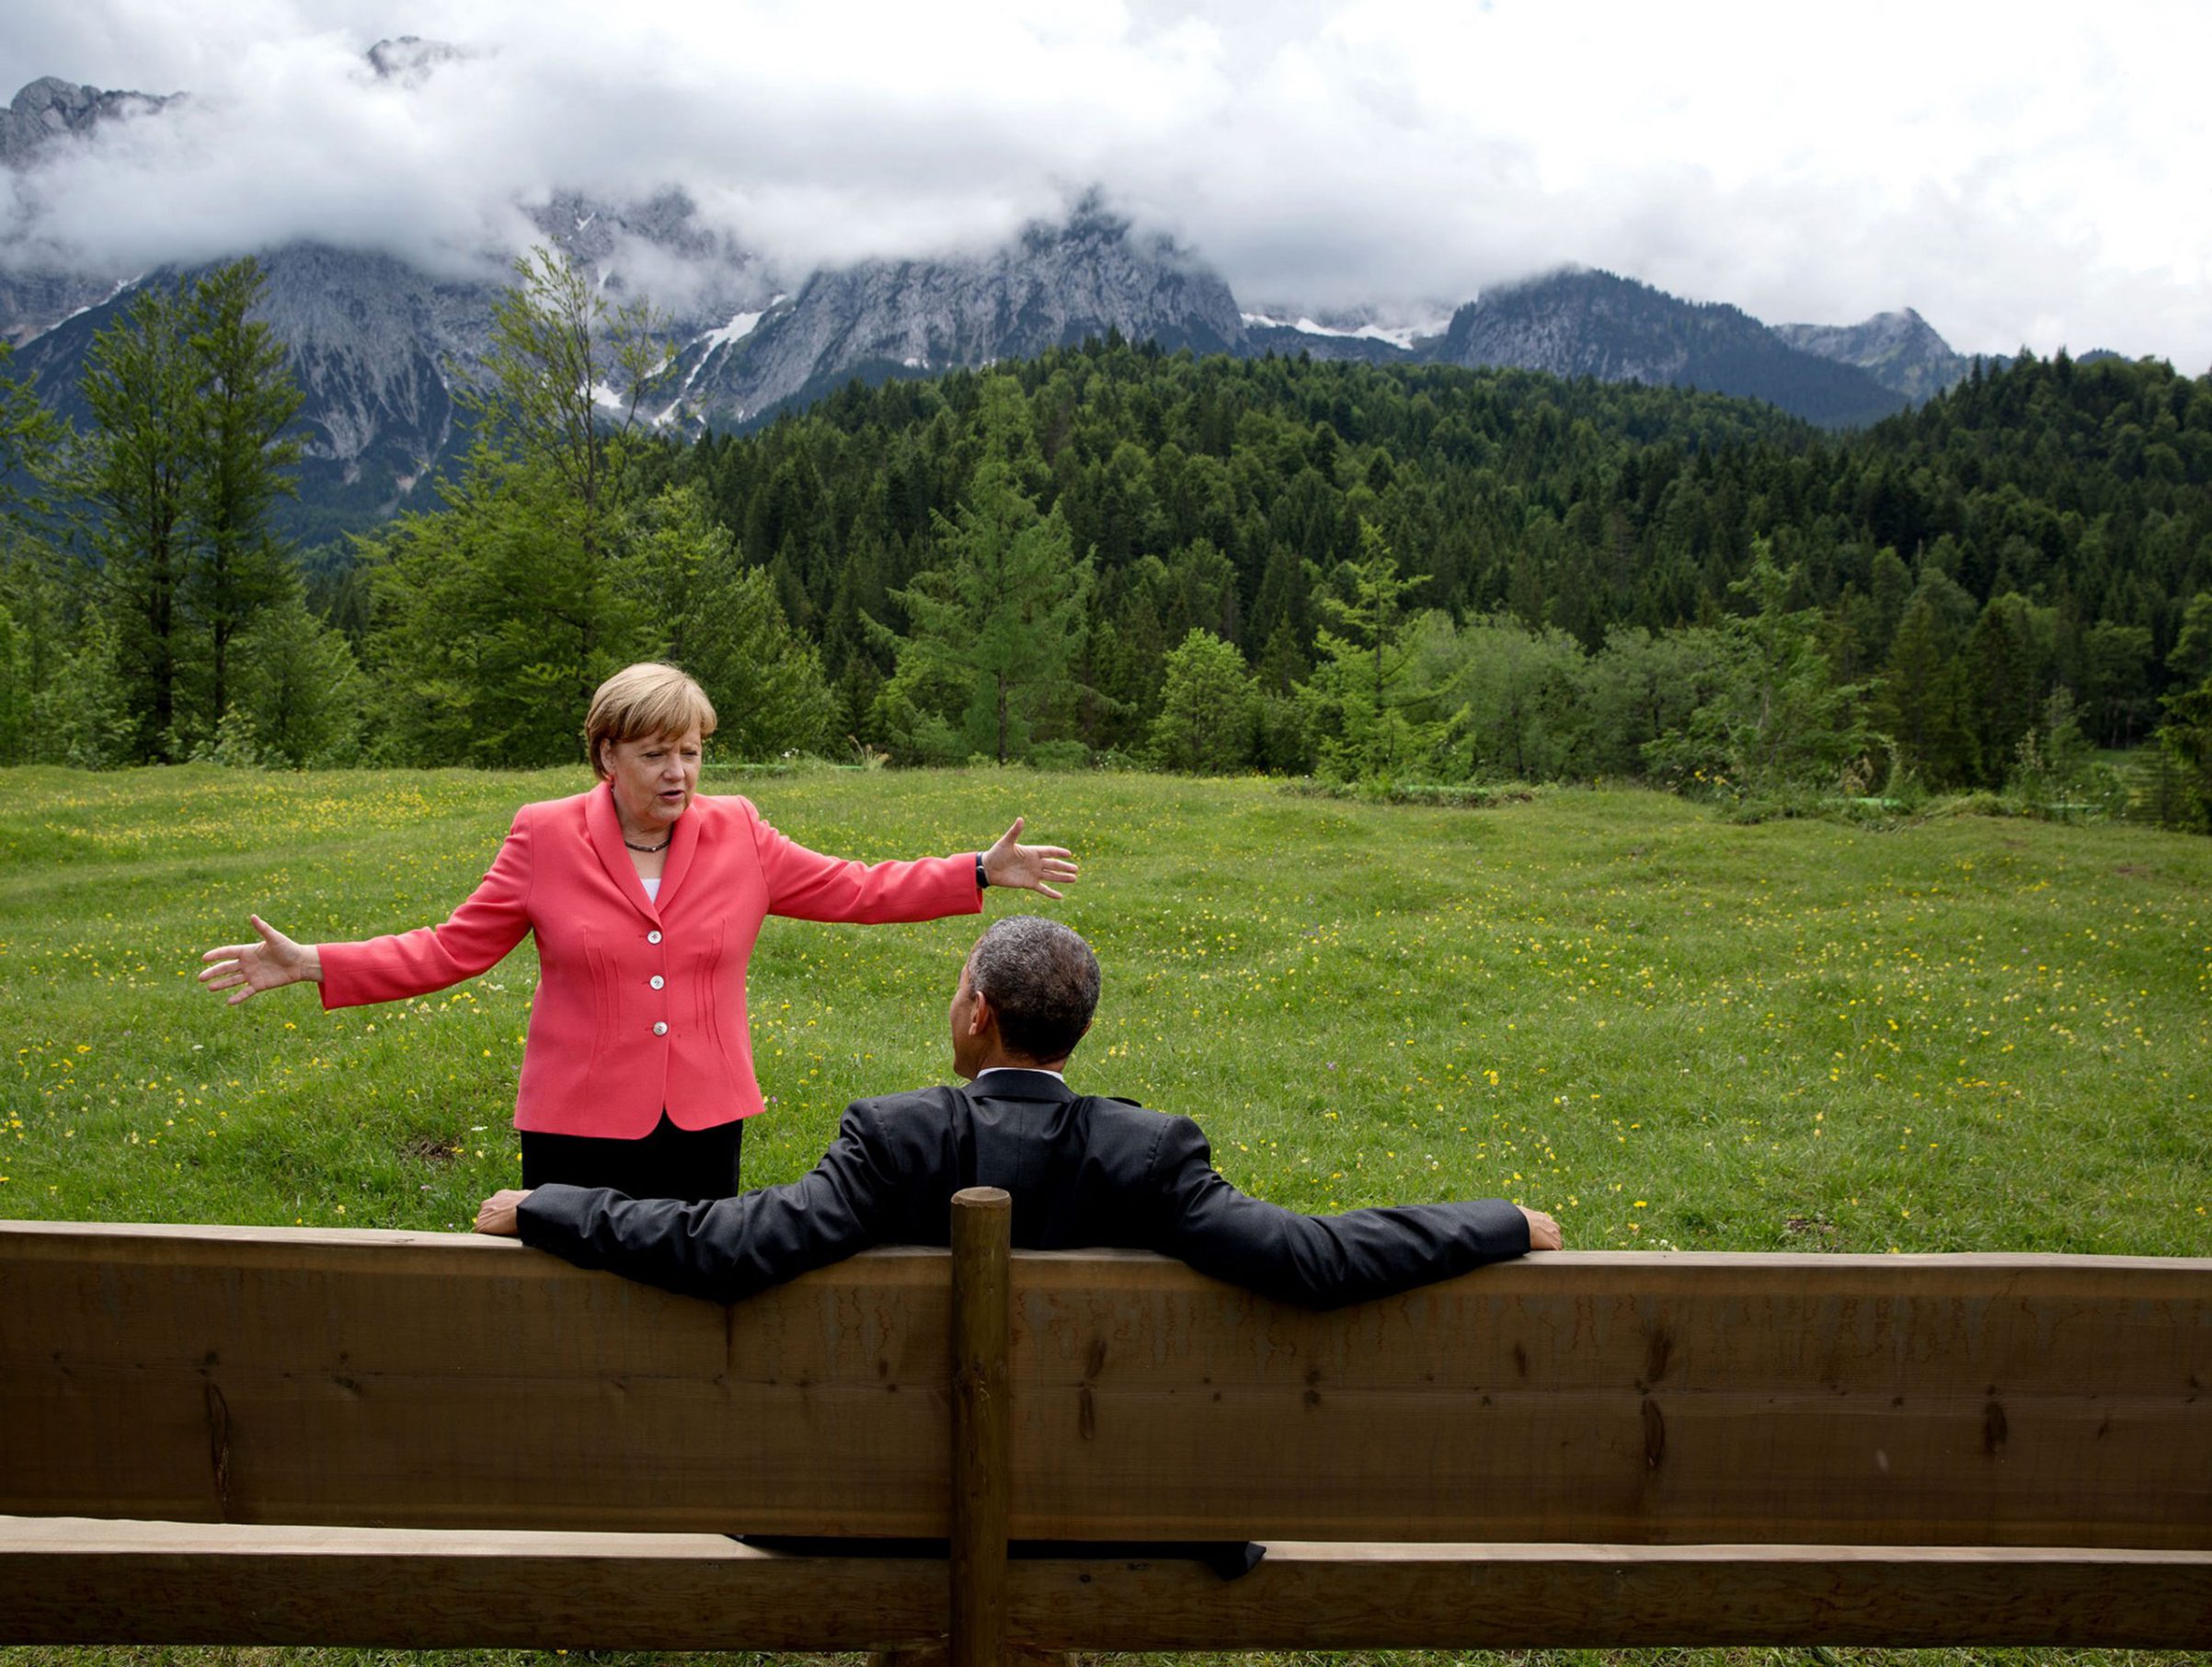 German Chancellor Angela Merkel talks with President Barack Obama at the G7 Summit in Krün, Germany, on June 8, 2015. (Pete Souza—The White House)